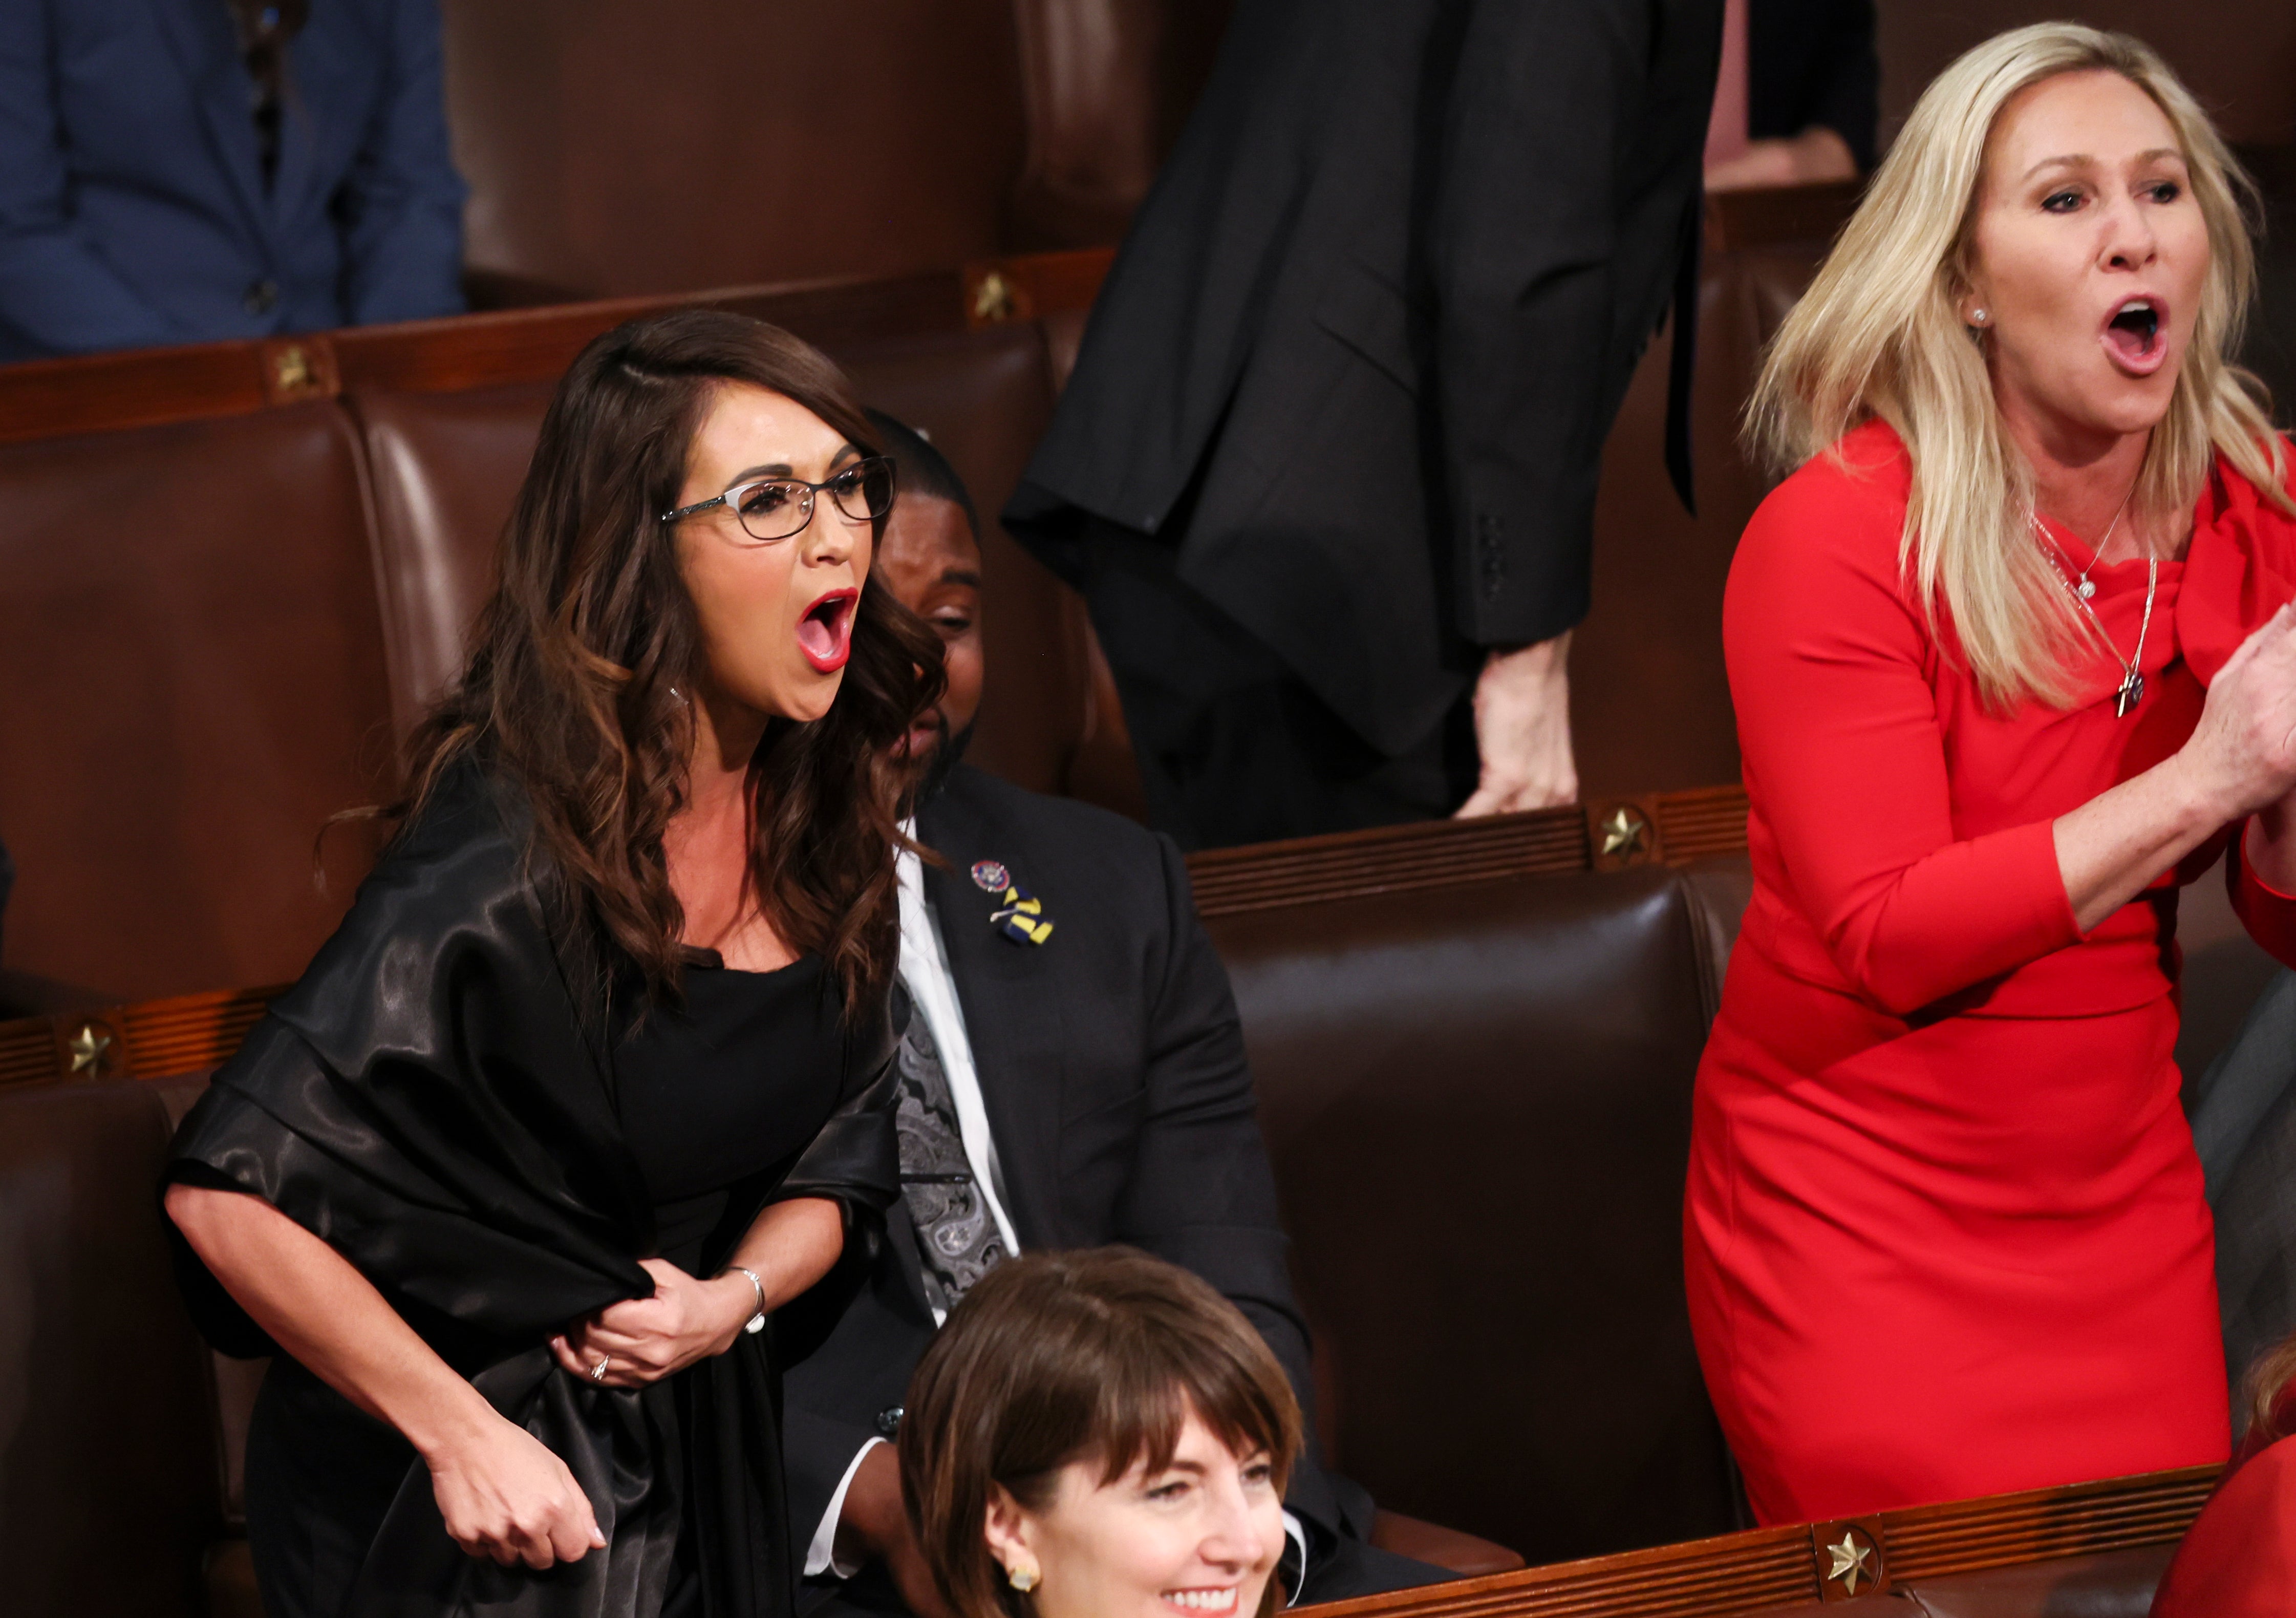 Rep Lauren Boebert and Rep Marjorie Taylor Greene heckled the president, Joe Biden, during his State of the Union address